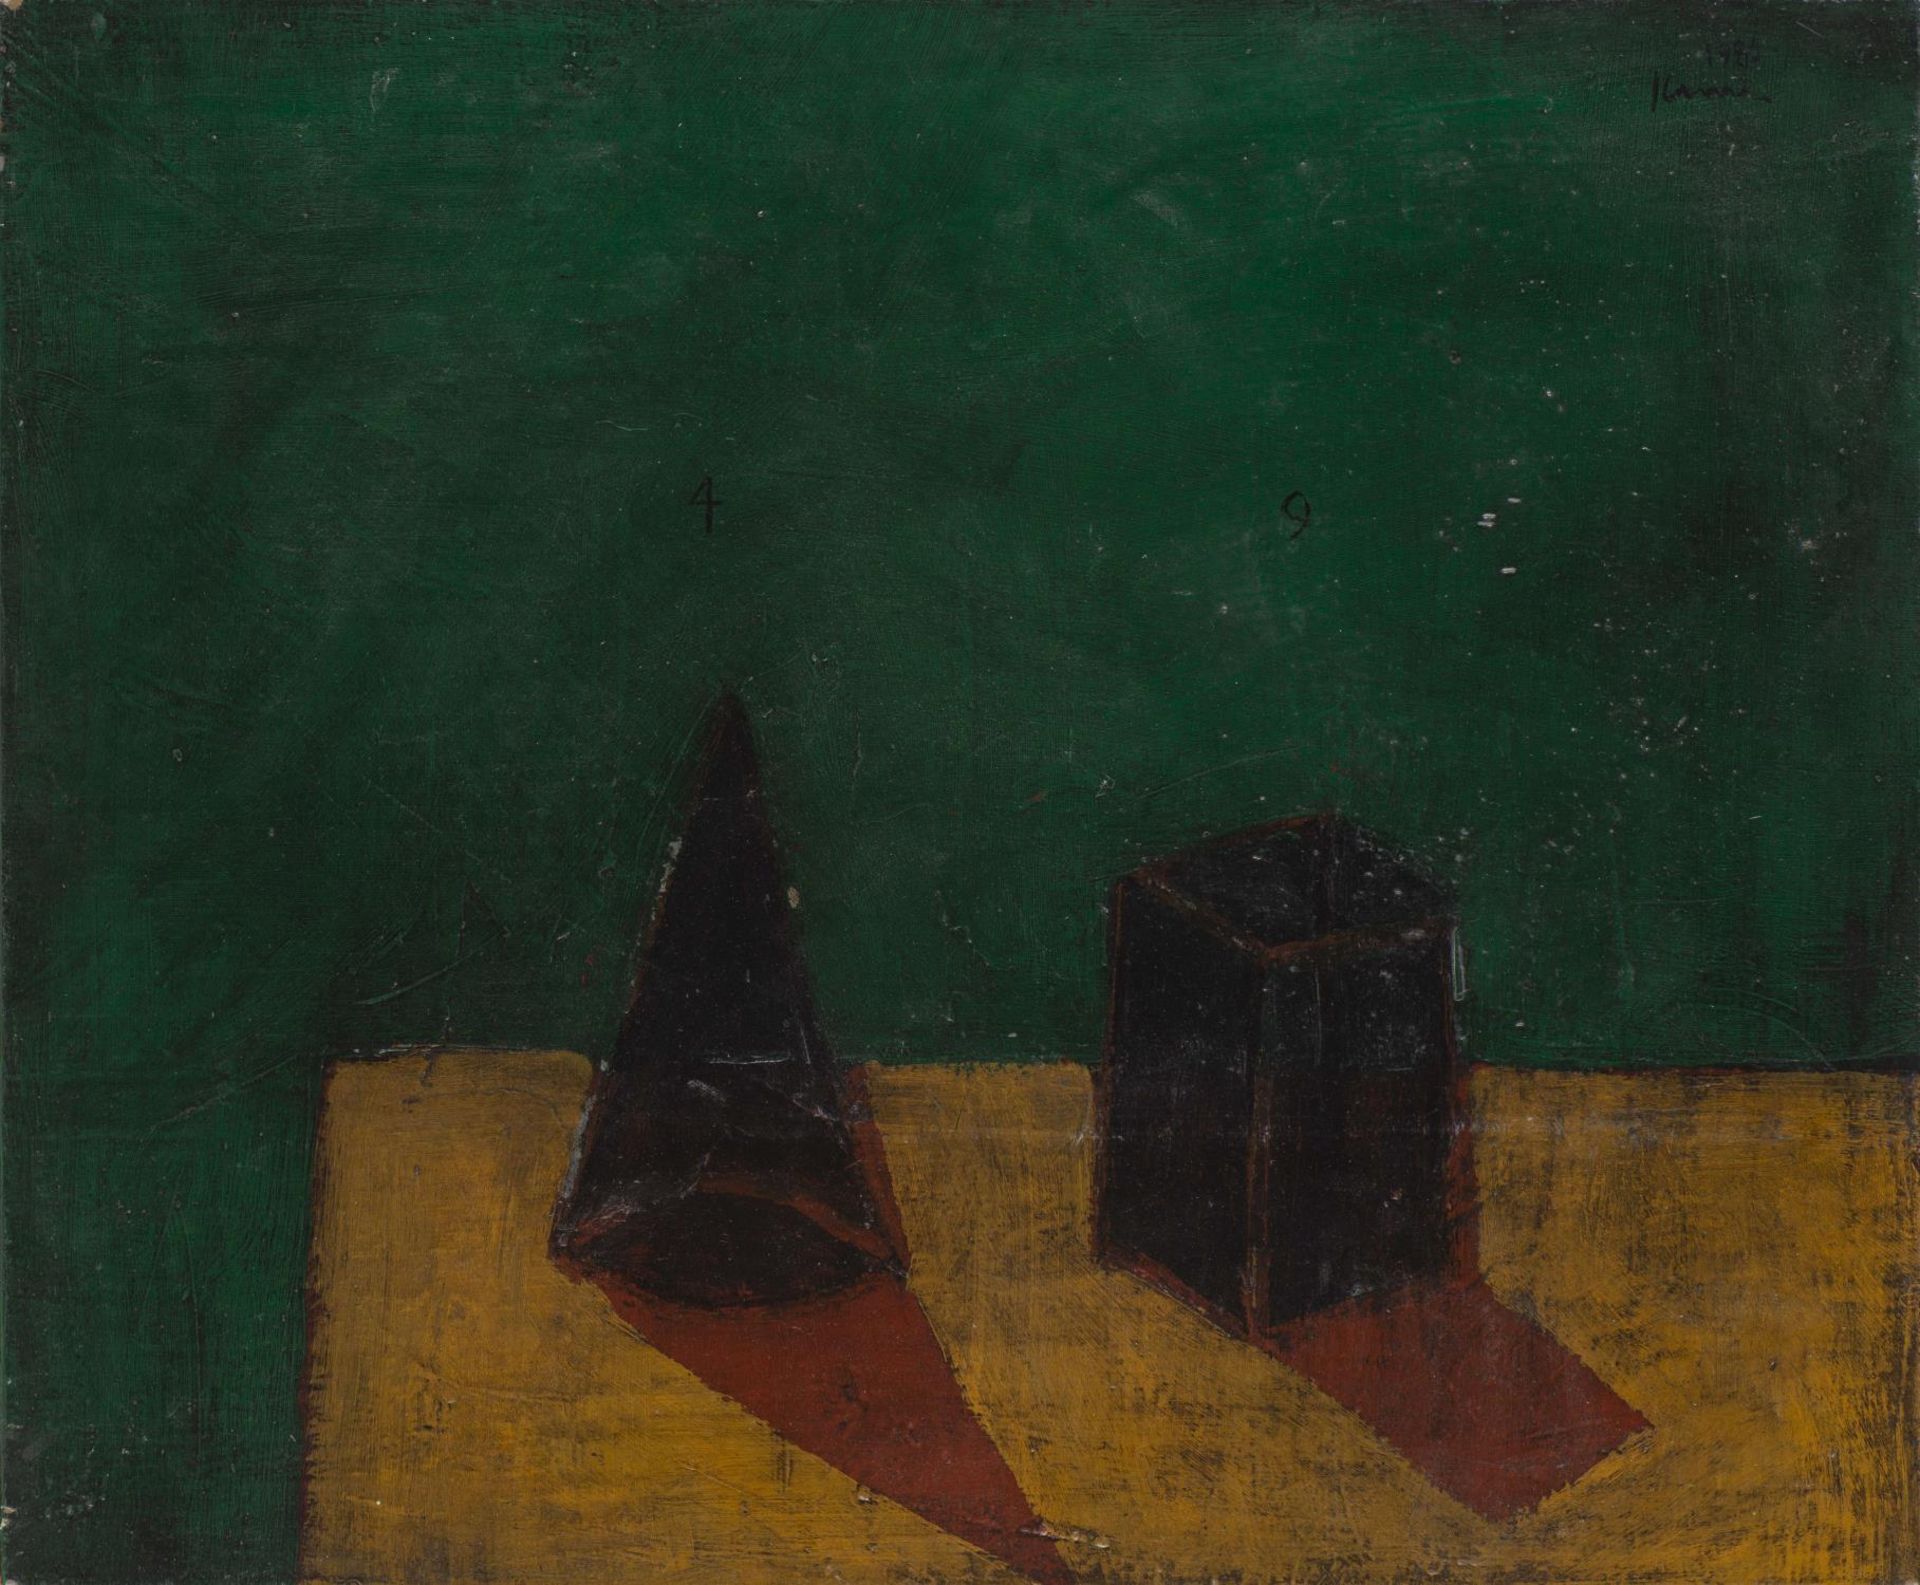 Charles KURRE (né en 1953), "Still life with objects n°4 & 9" - Image 2 of 14